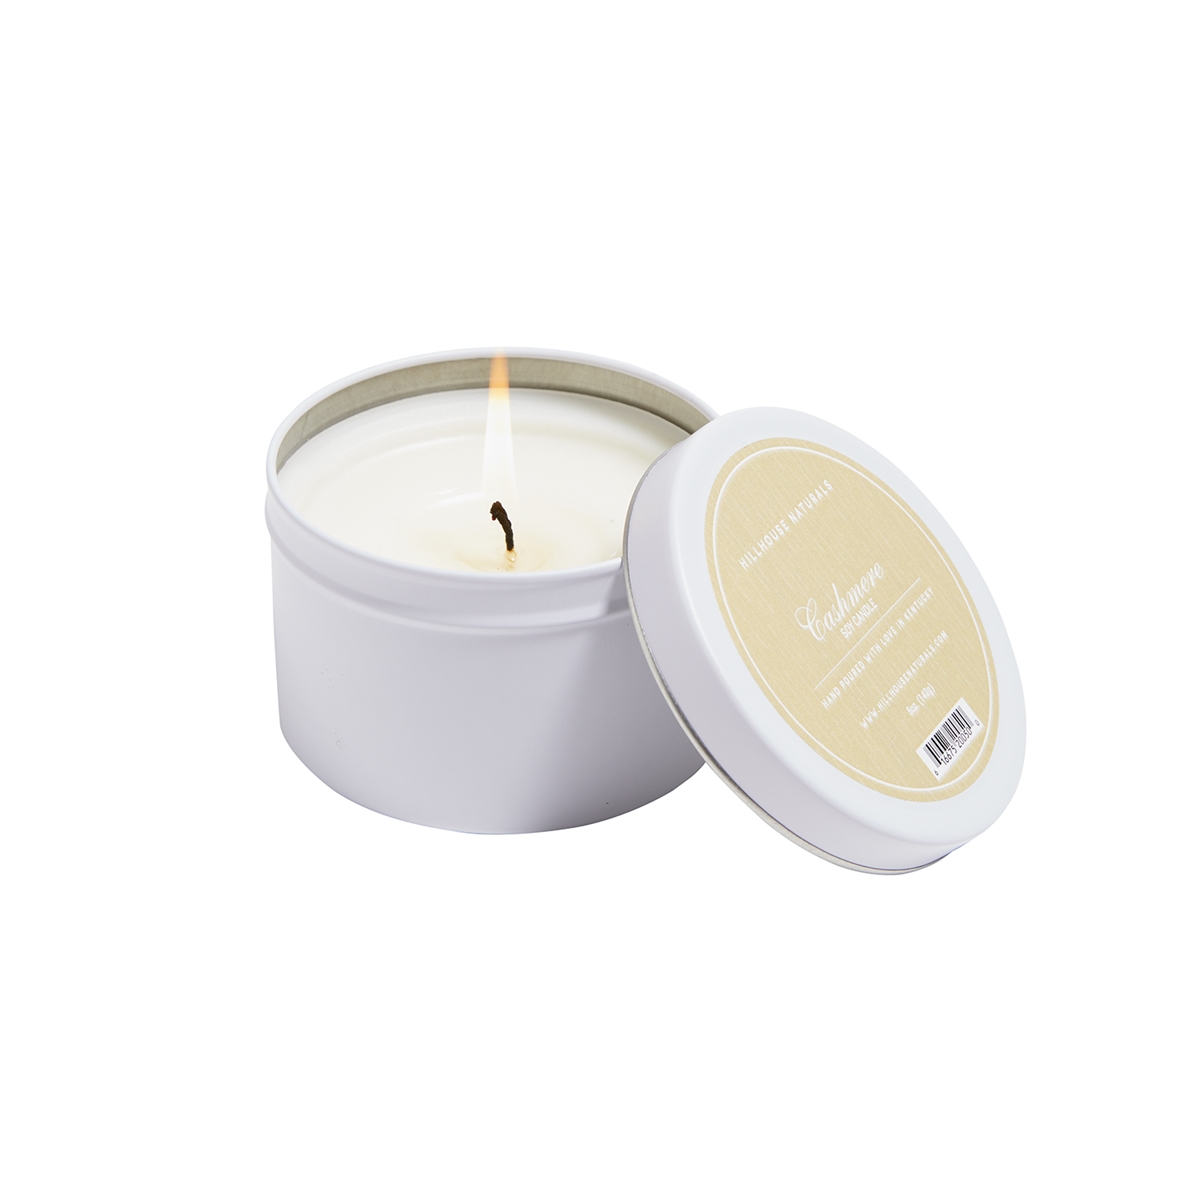 Cashmere candle in white tin 5oz.